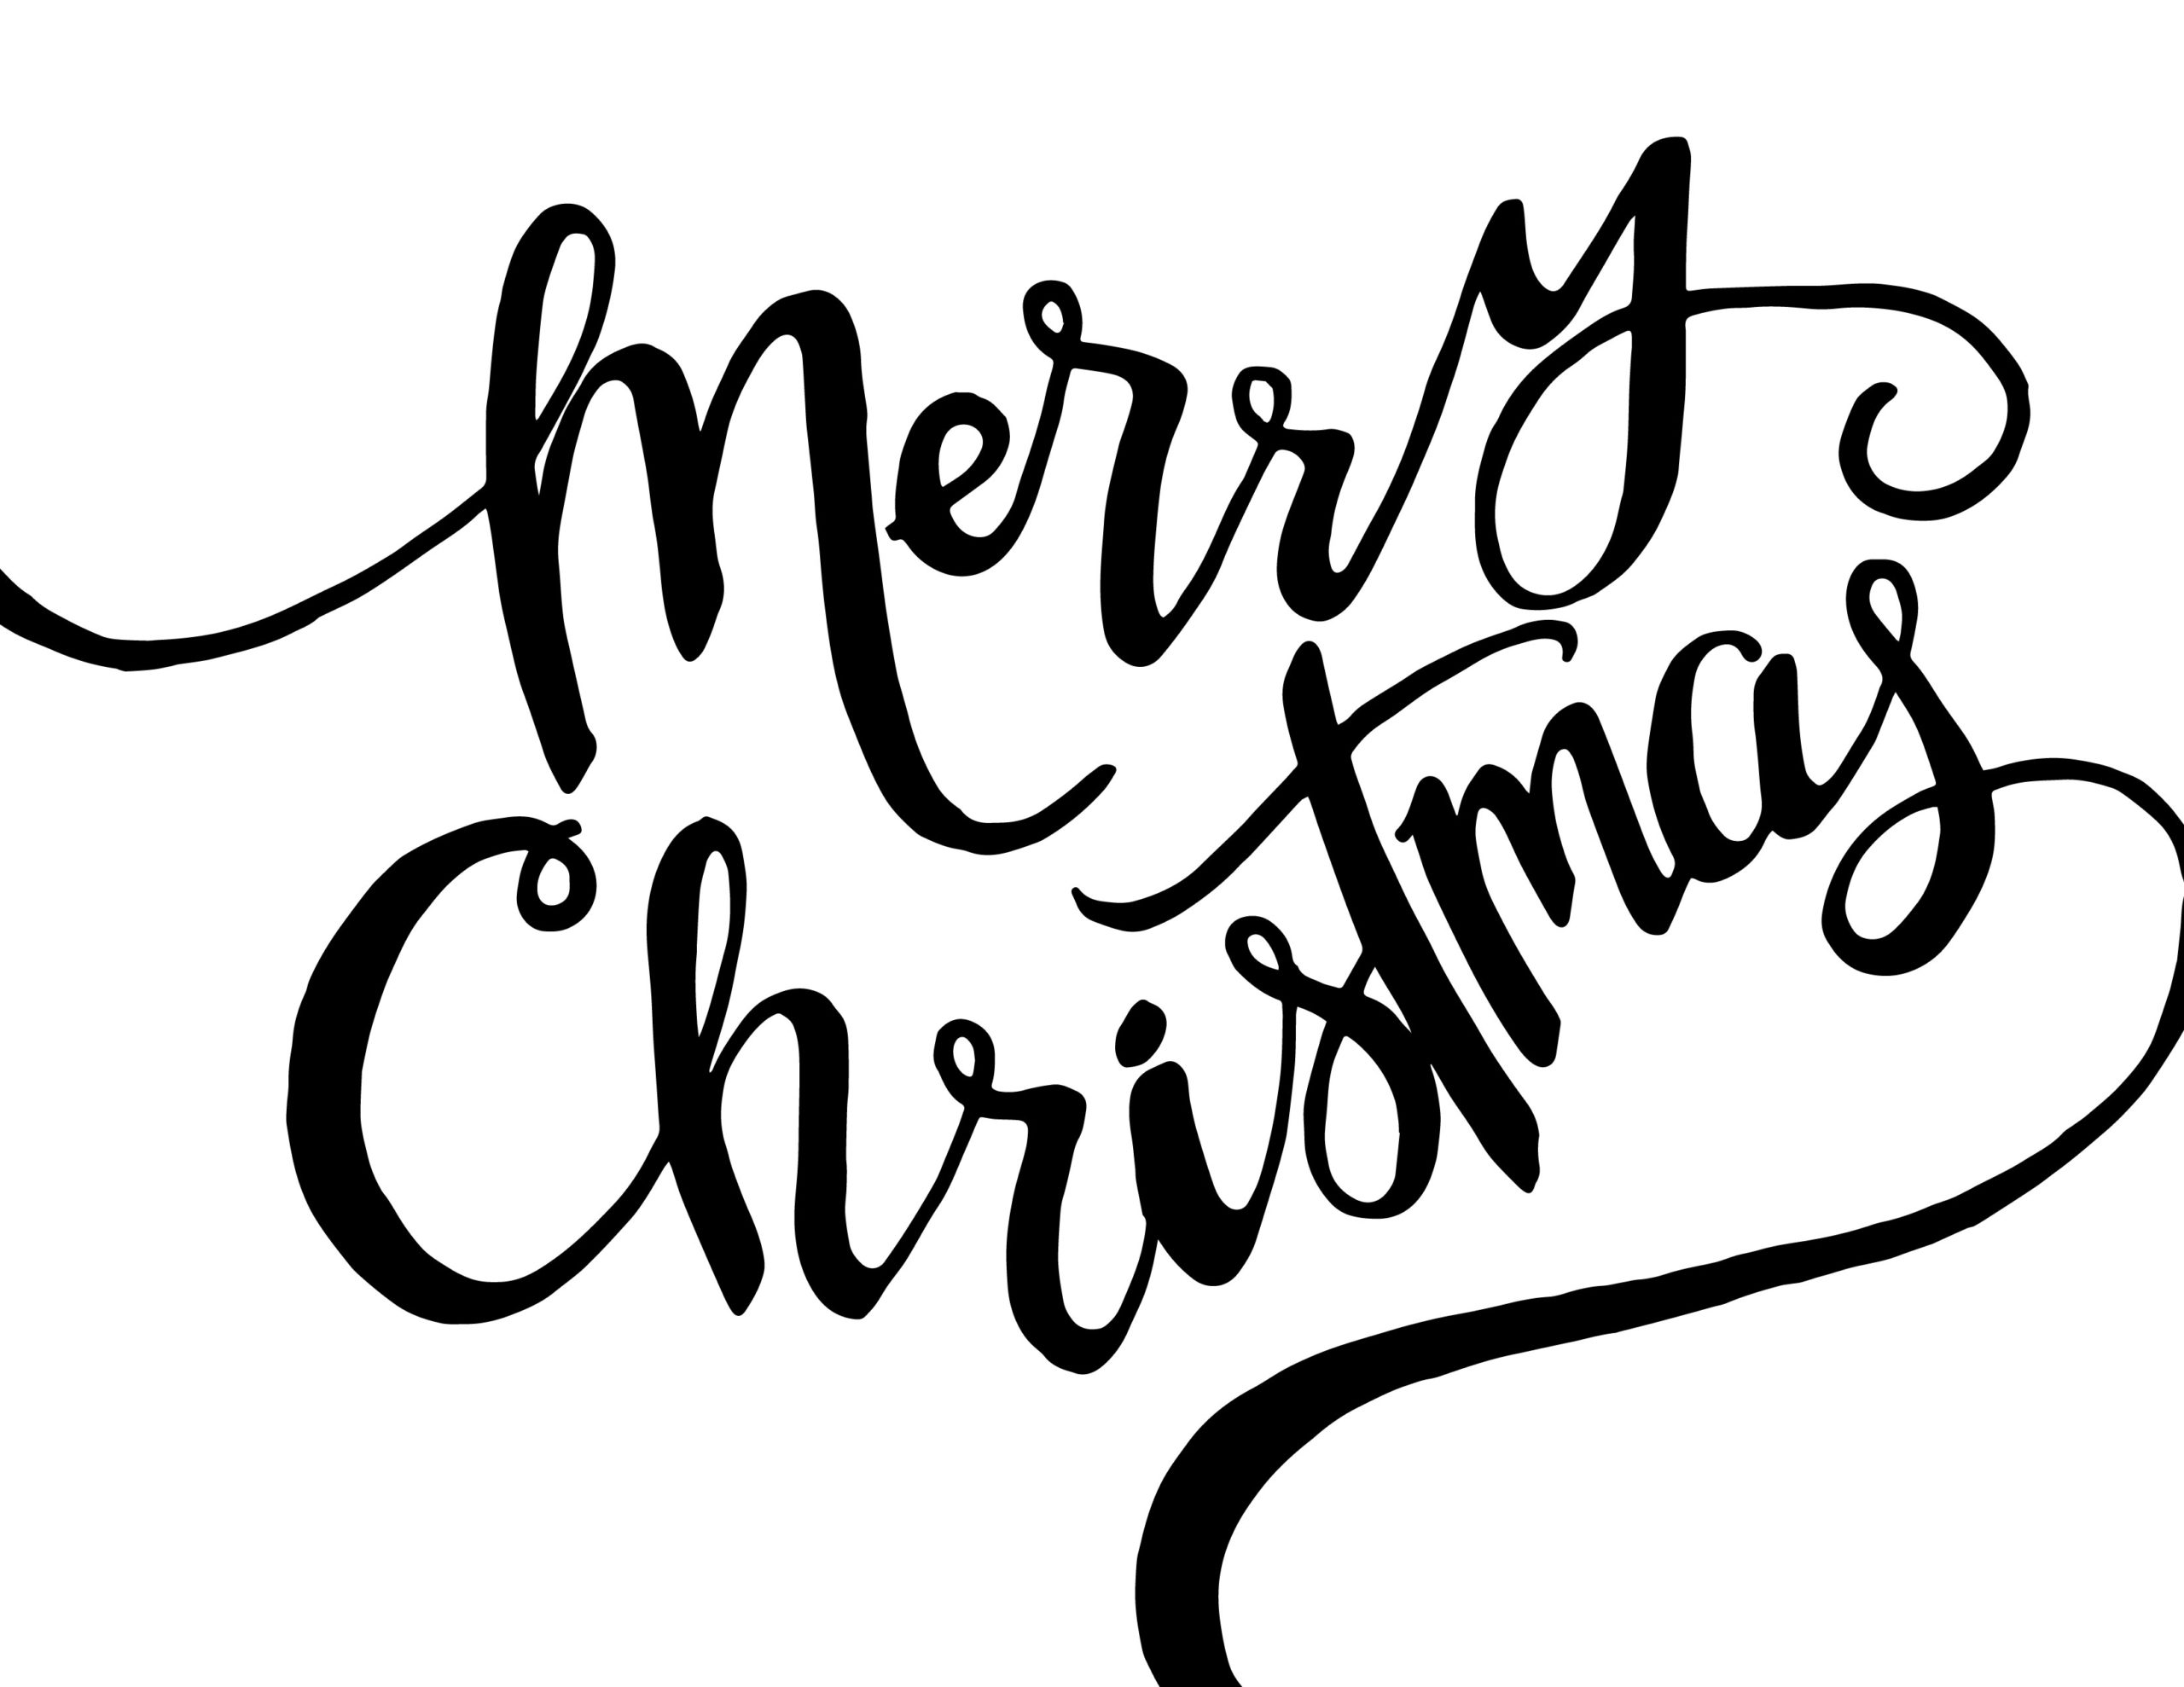 Merry Christmas Black And White Stock Photos & Images